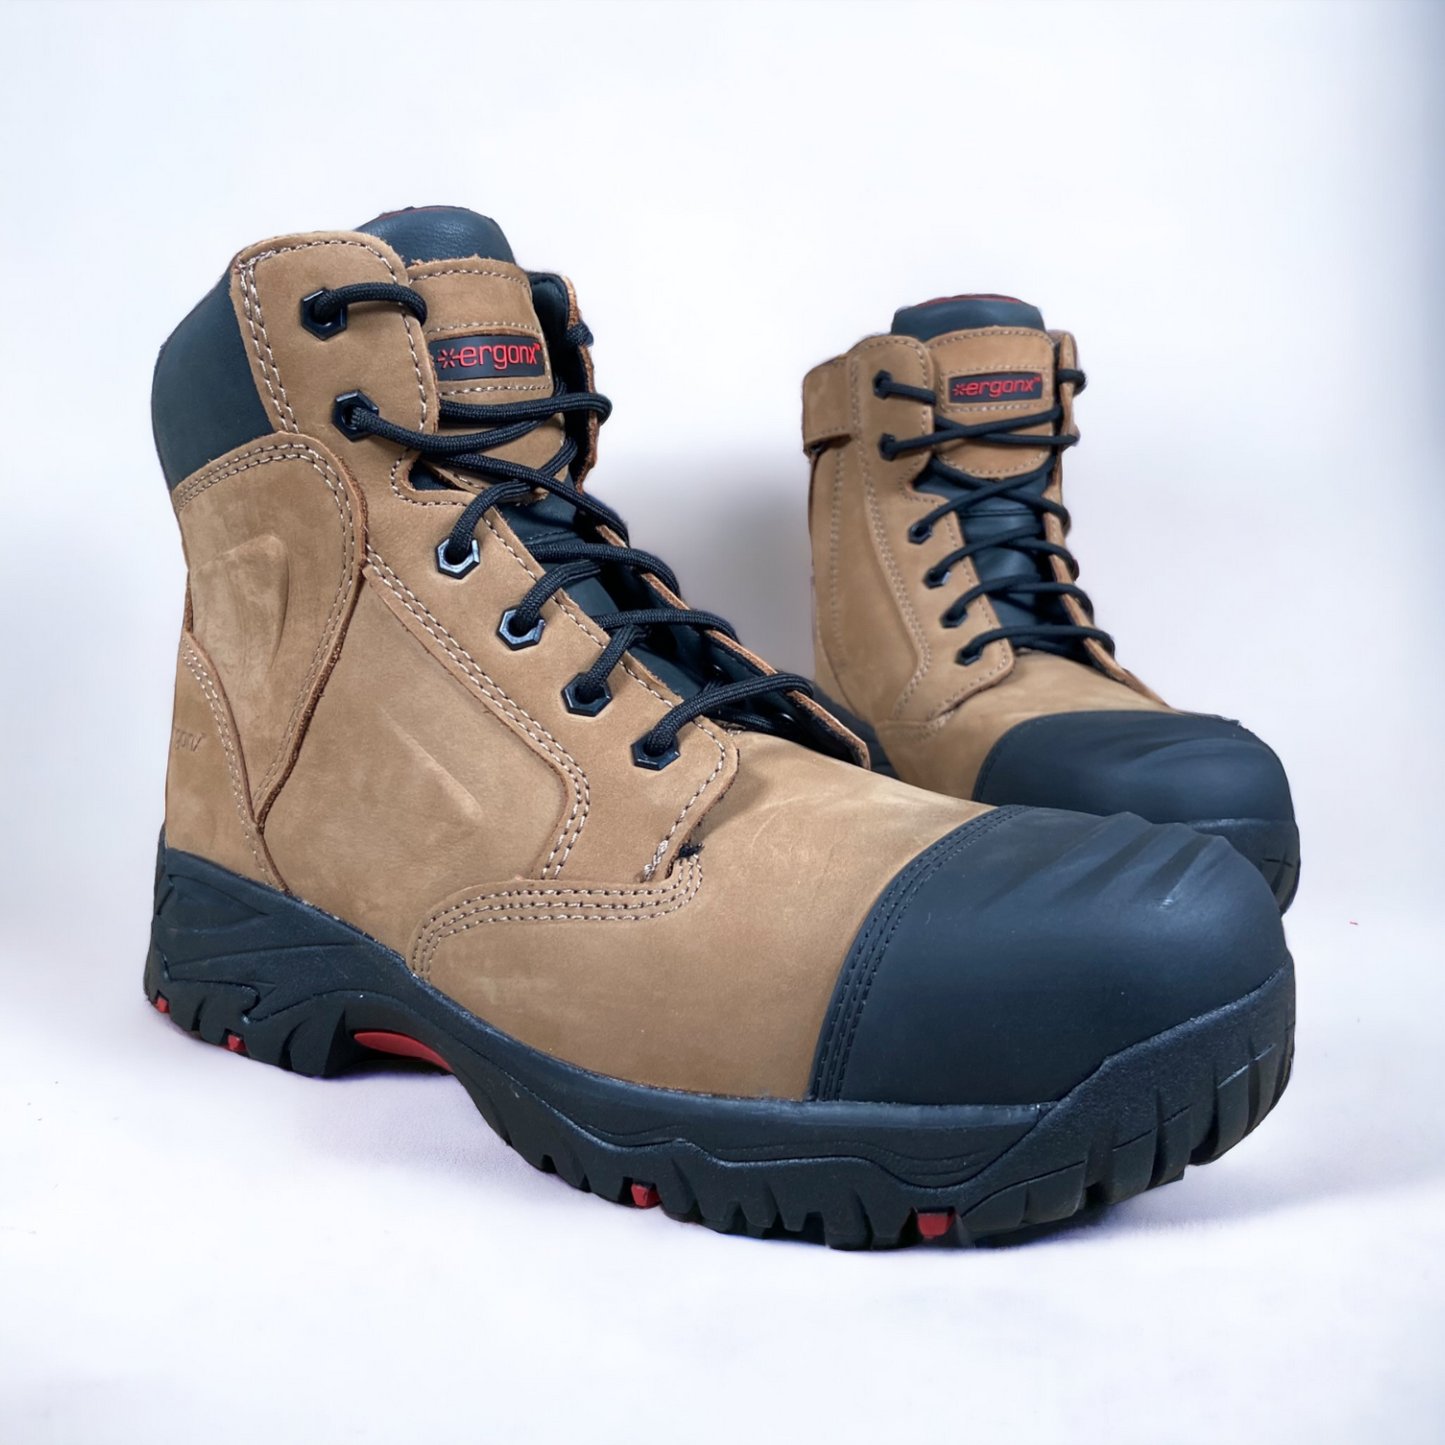 Ergonx Safety Boots Lace Up (Helium) Tan